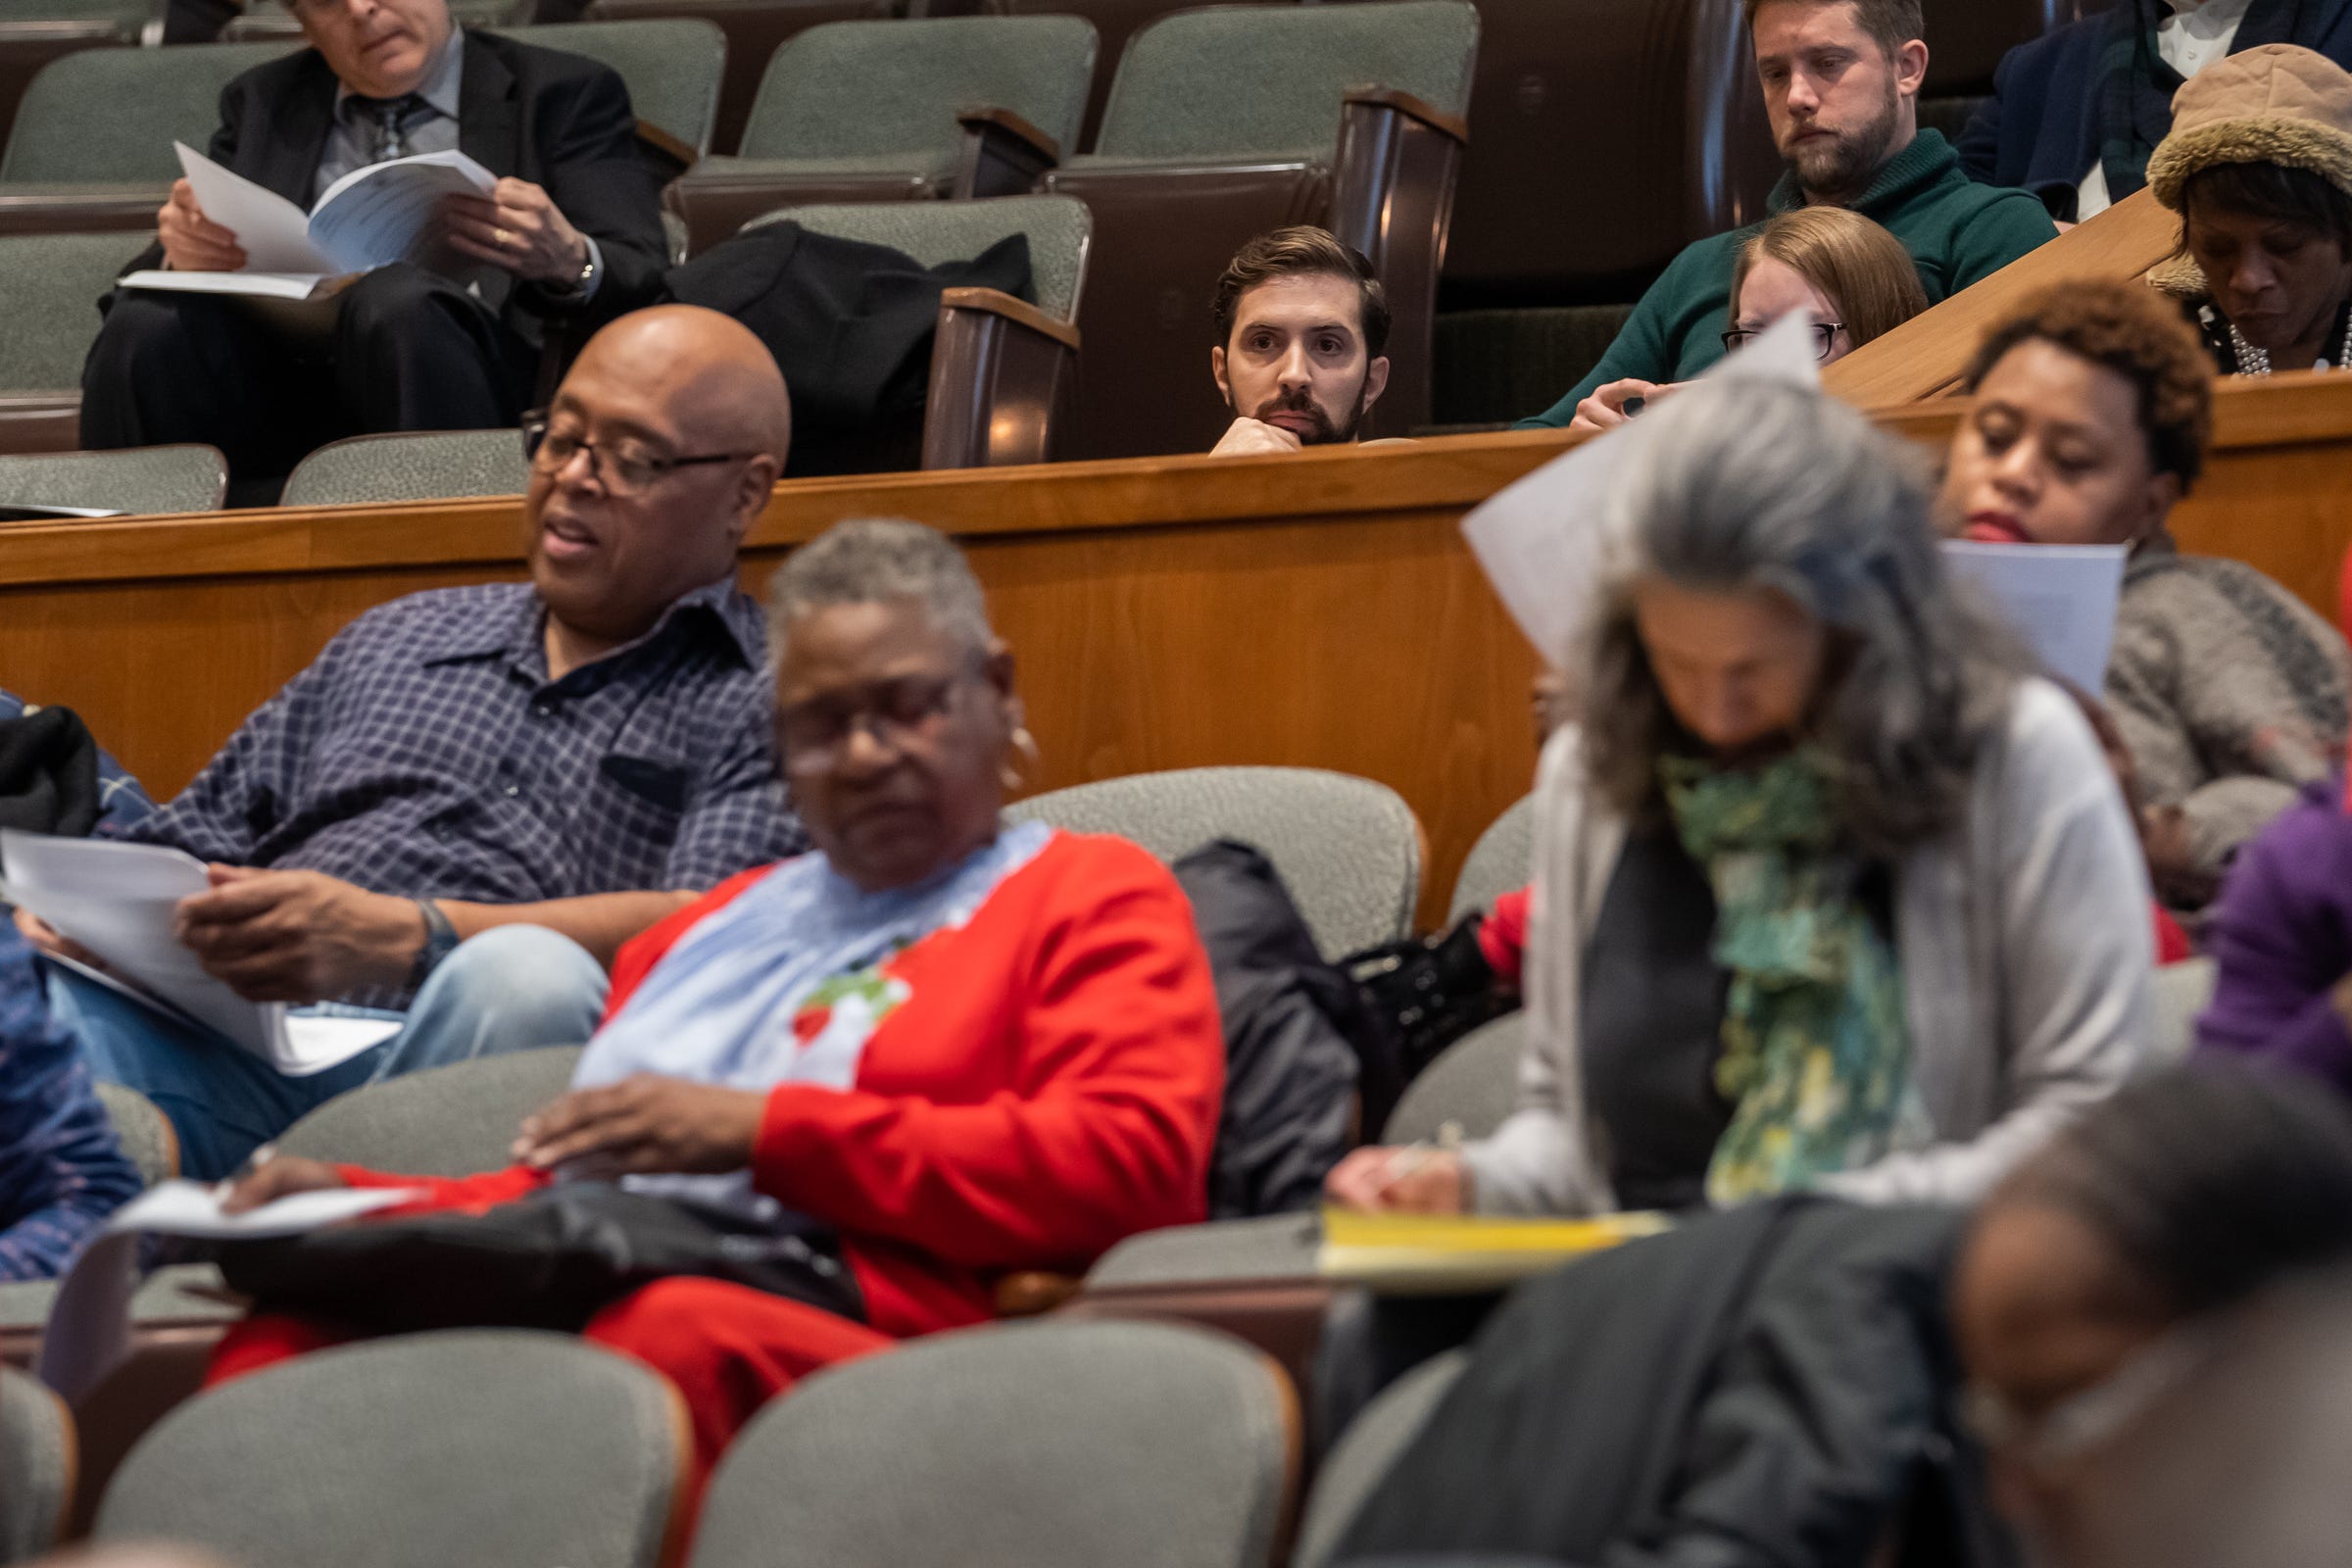 Adam Schloff (center), director of development for Astral Weeks, listens during a Detroit City Council meeting as he sought a brownfield tax abatement worth $276,897 for the 2119 Field Street Project on Tuesday, Feb. 18, 2020.